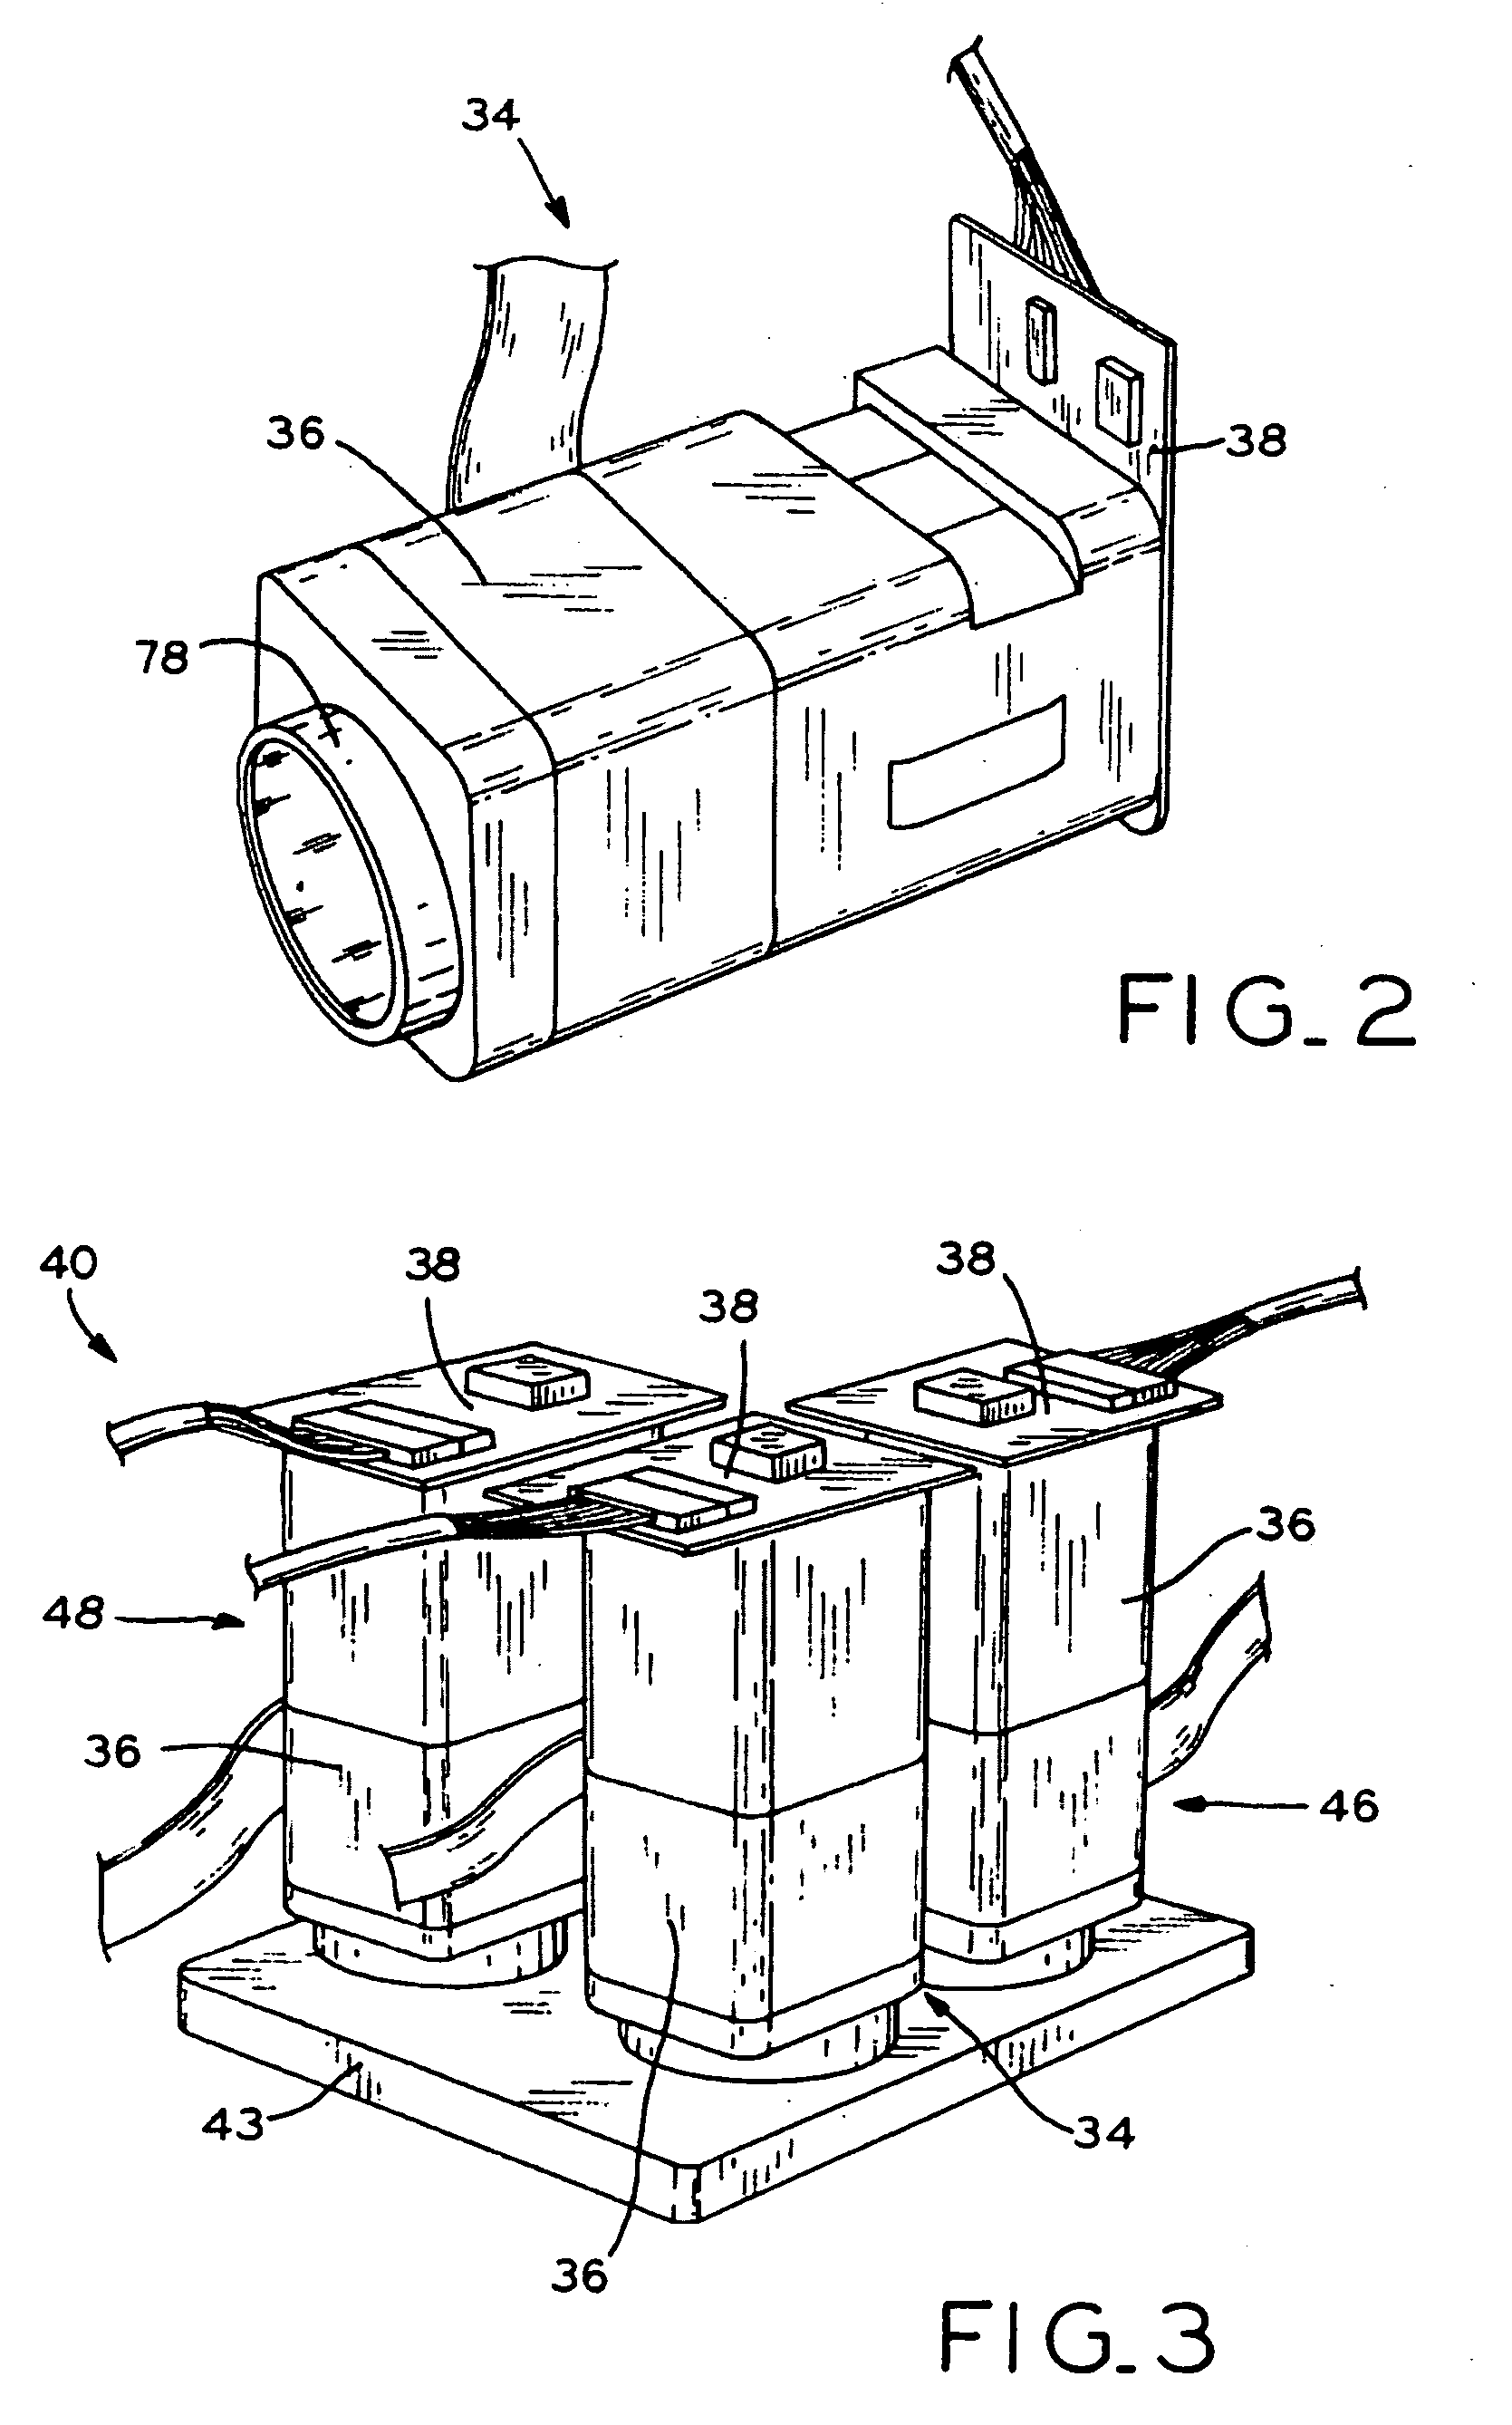 Stereoscopic three dimensional visualization system and method of use